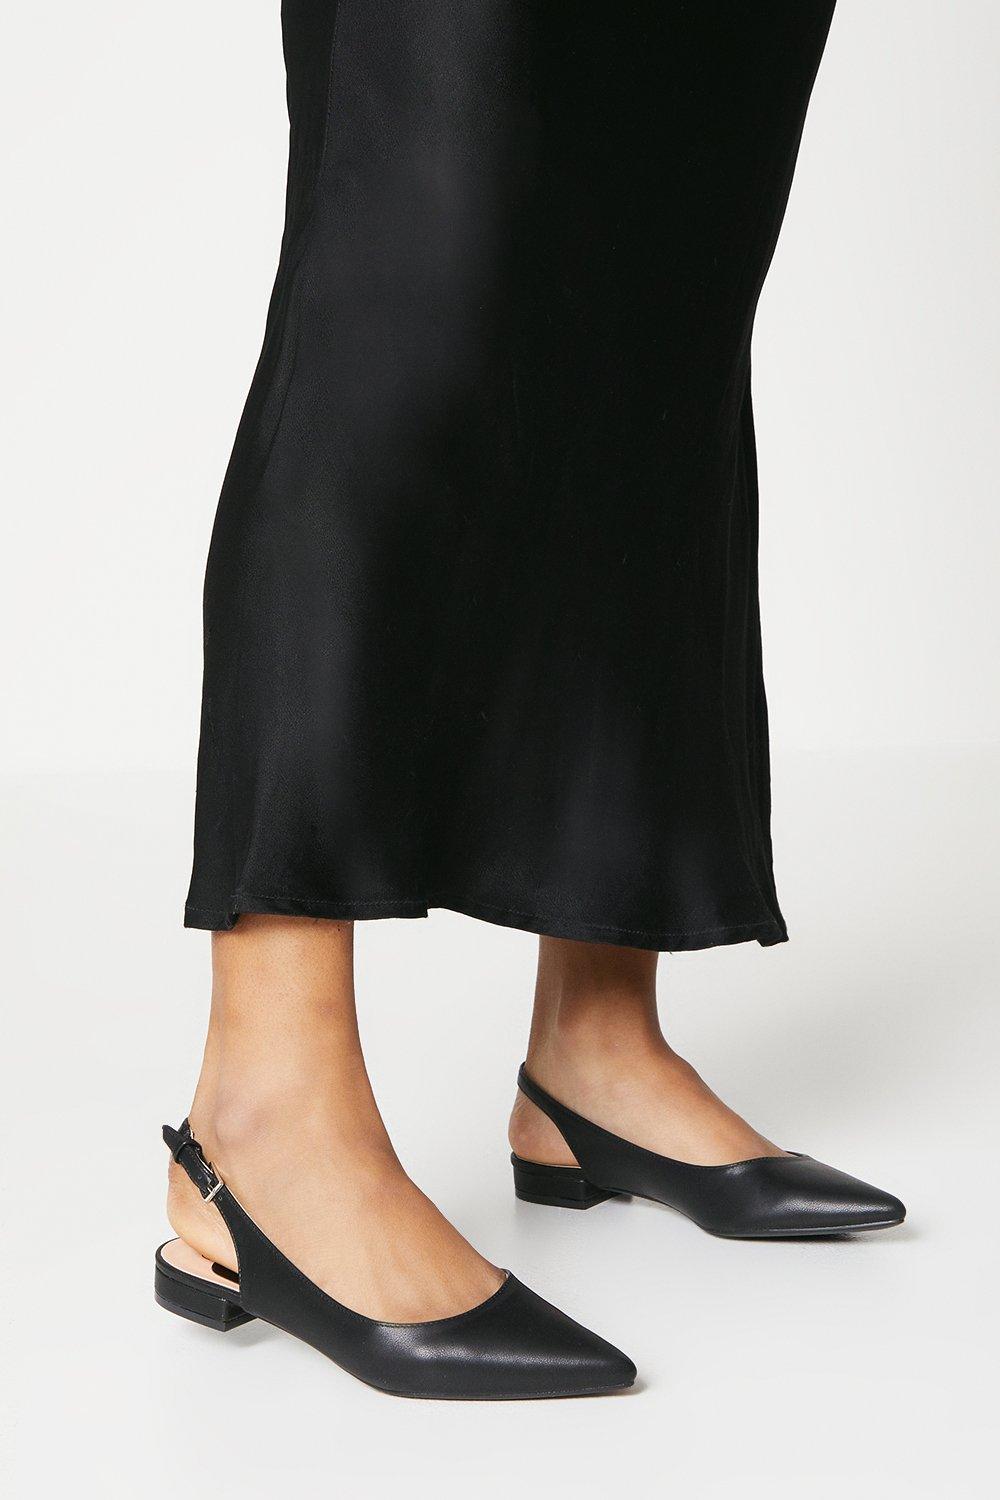 Women’s Pippin Pointed Slingback Ballet Pumps - black - 5